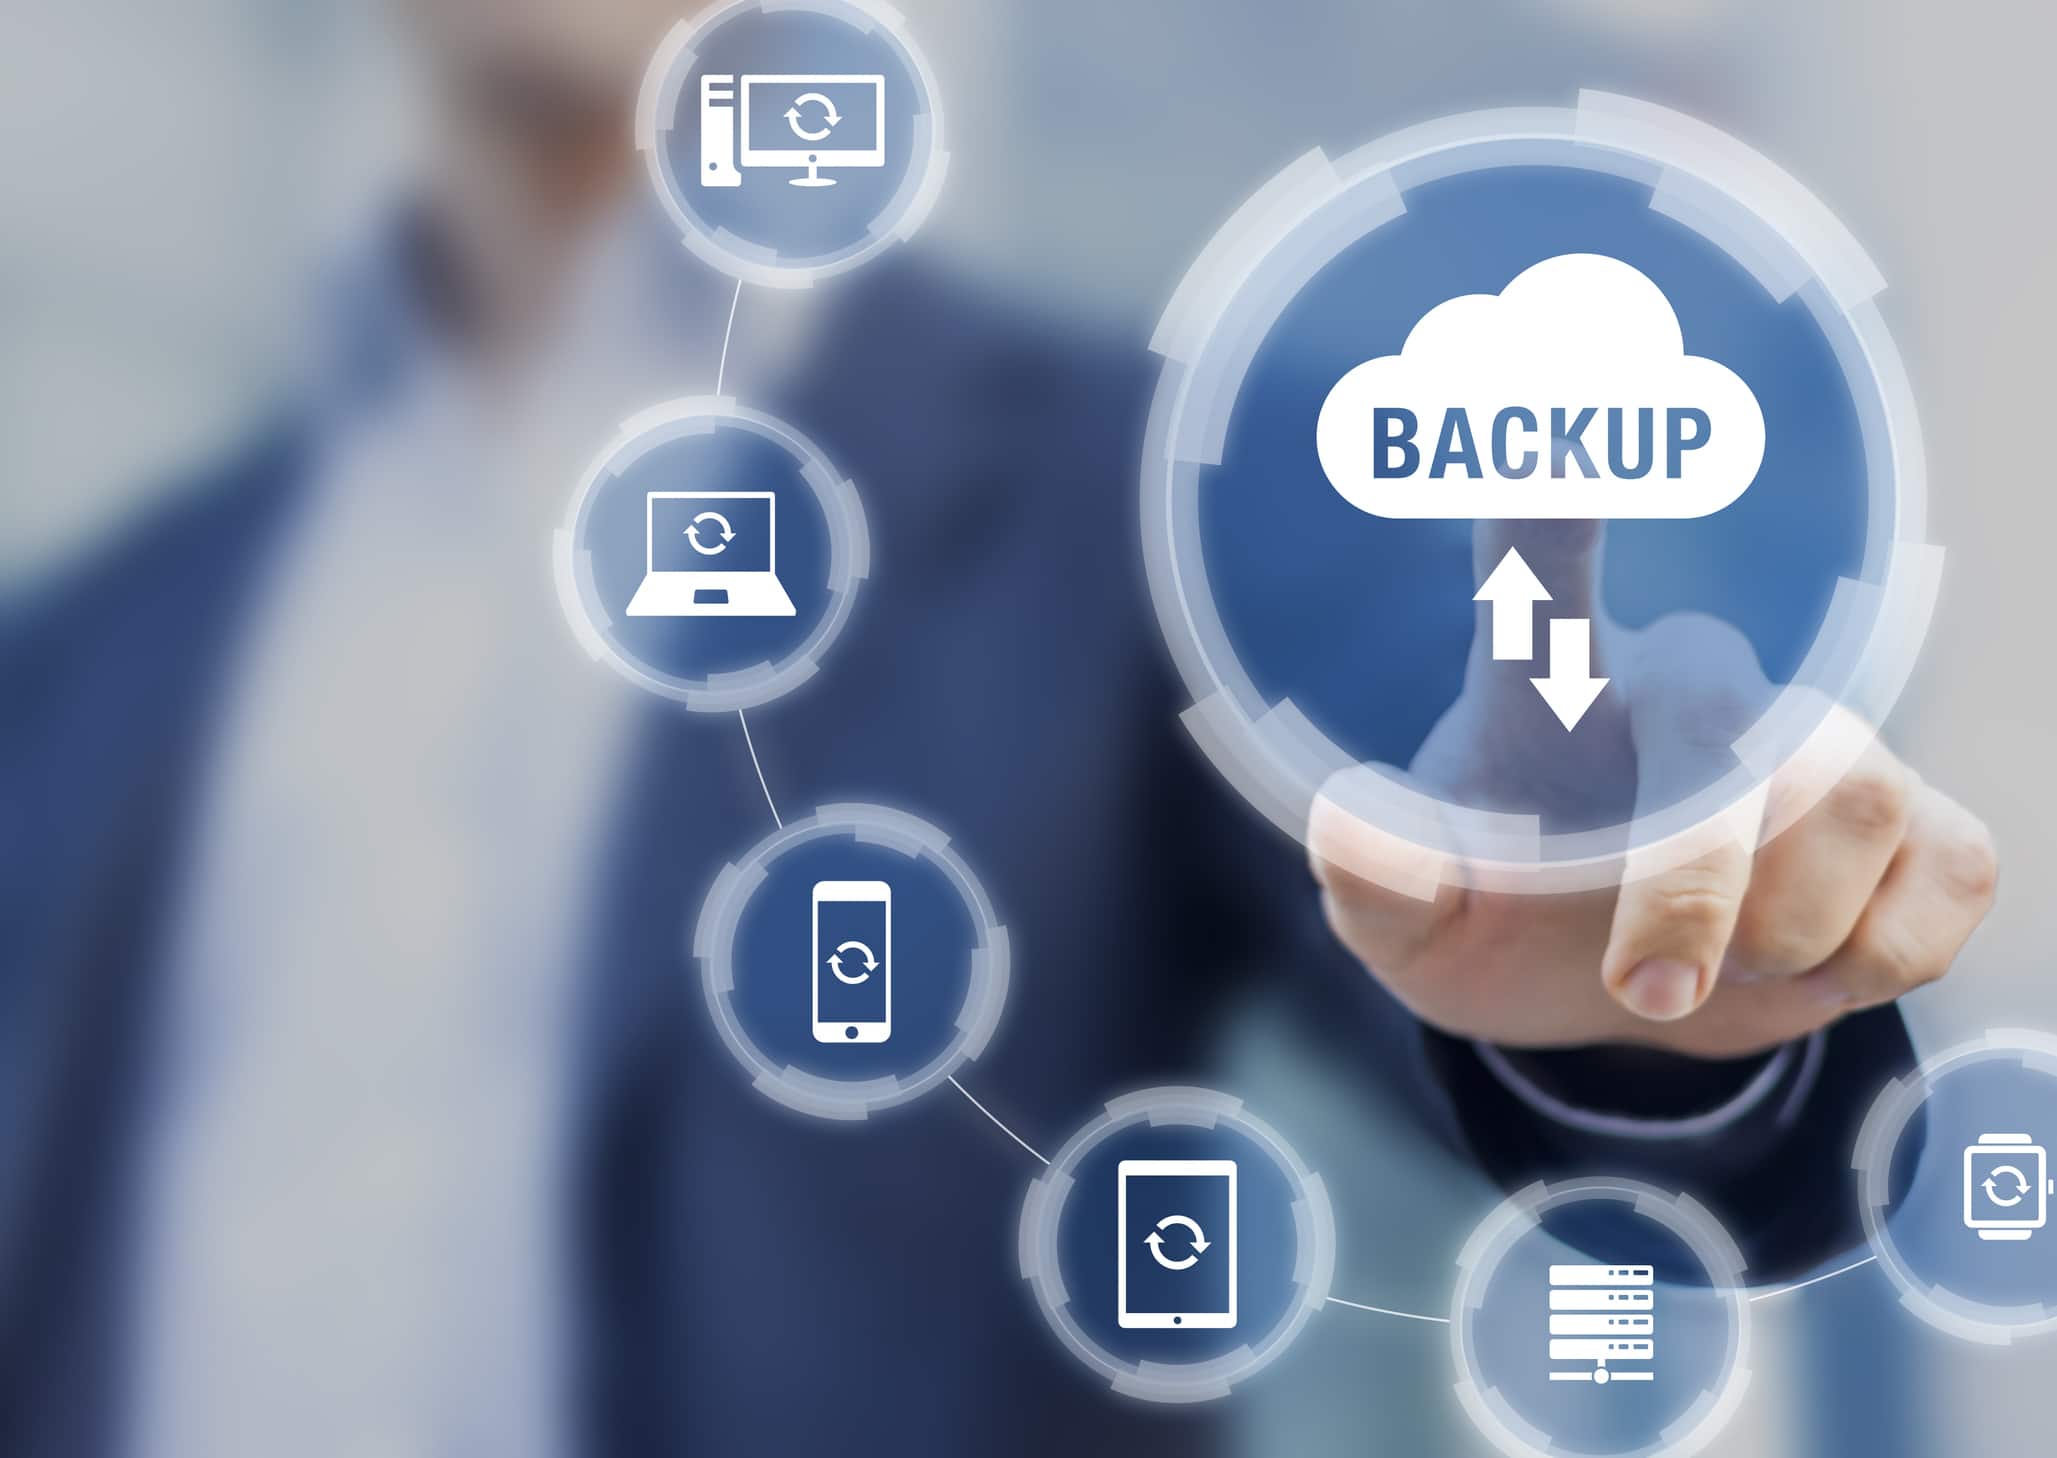 Backing up files and data on internet with cloud storage technology